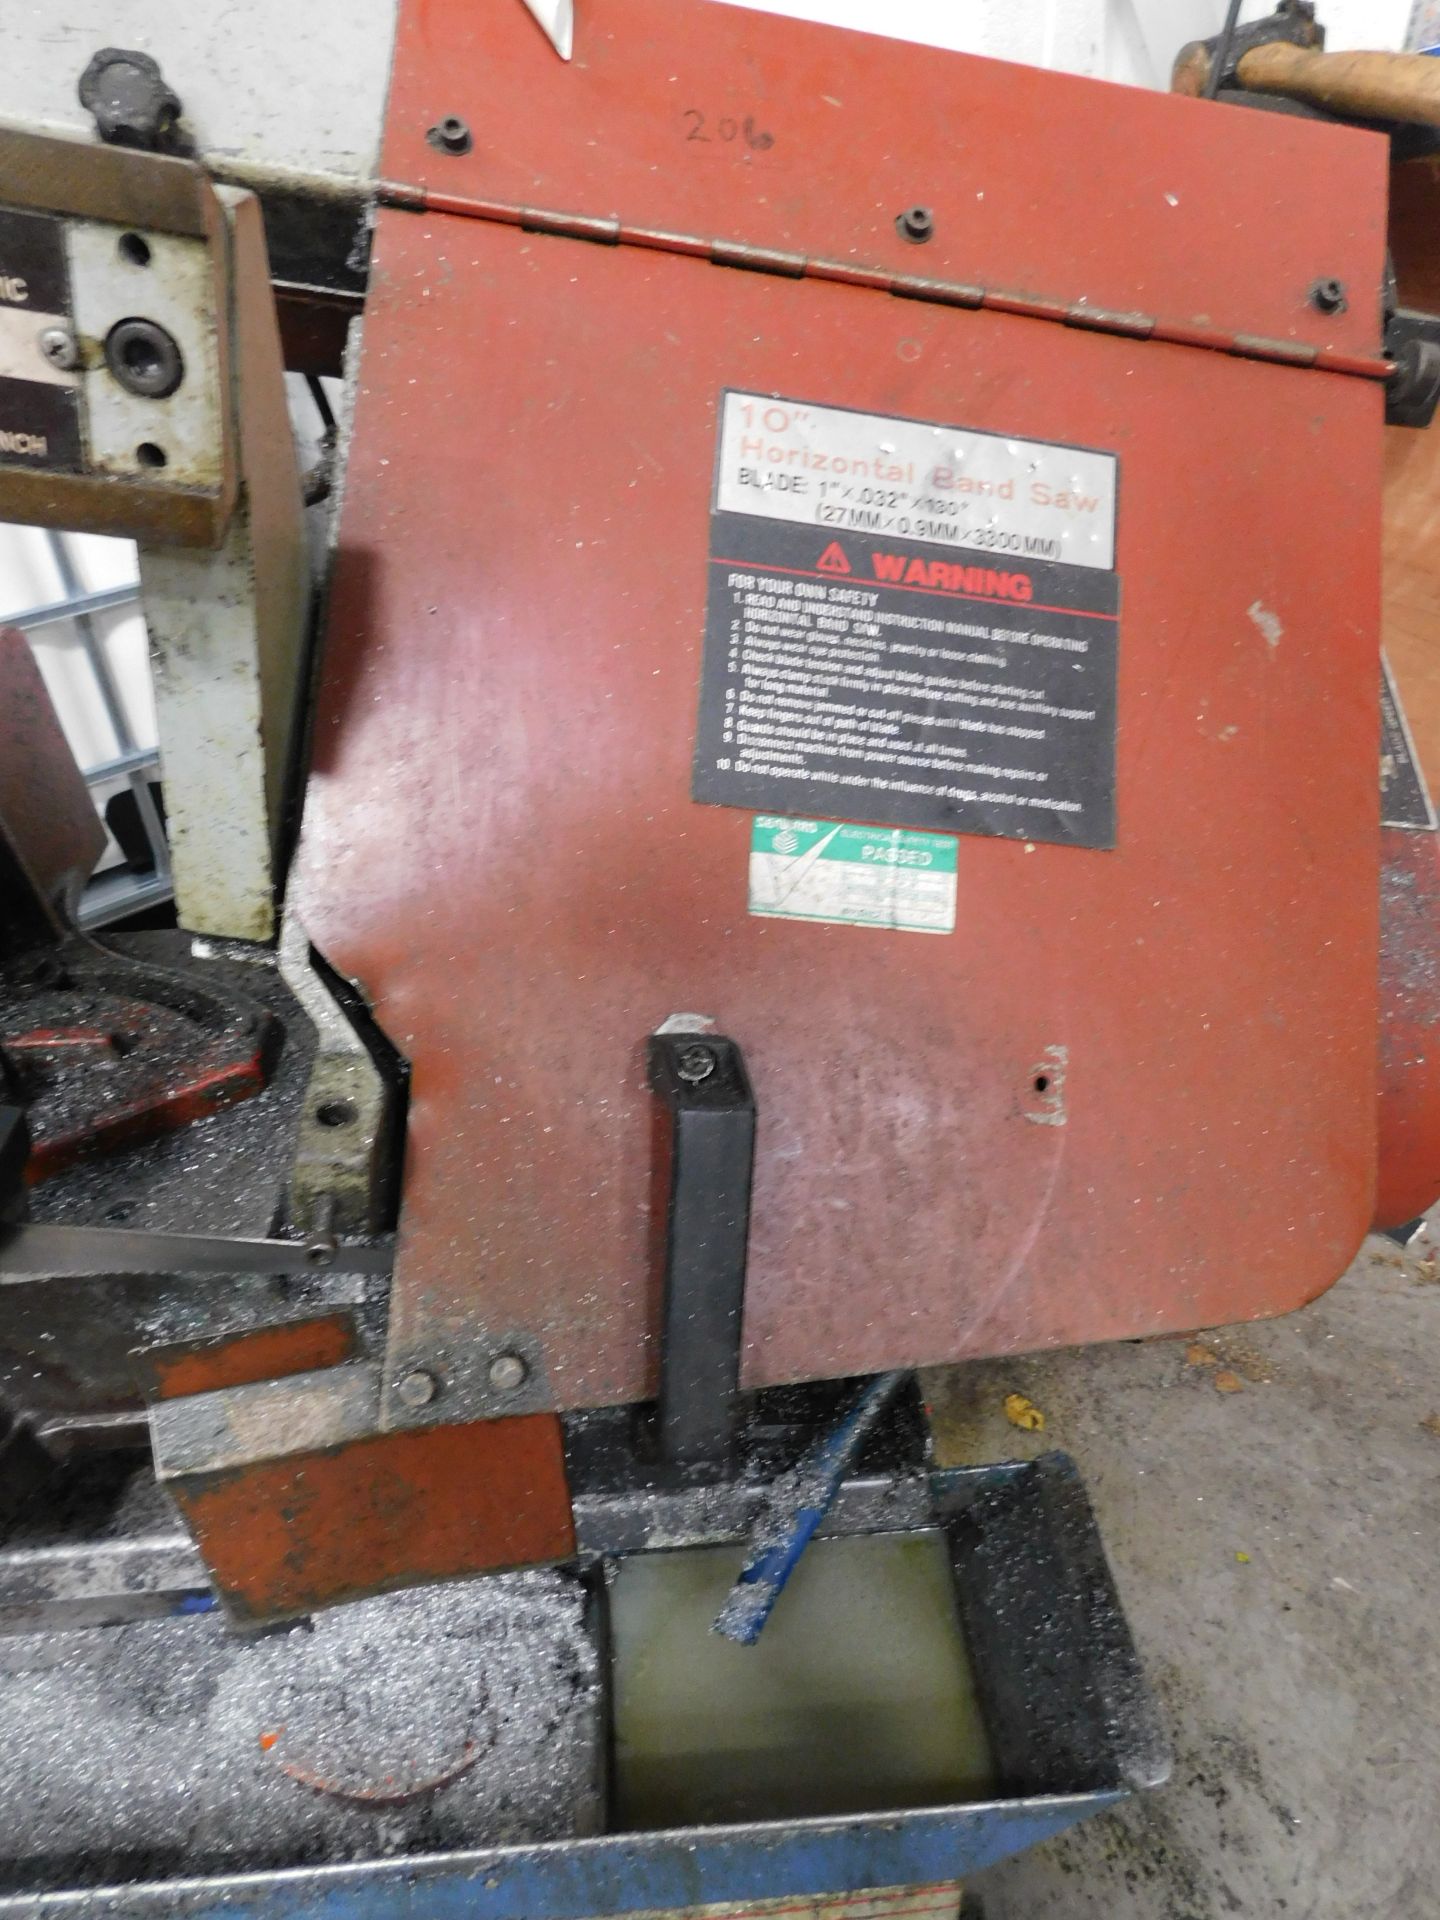 XYZ 260 10in Metal Horizontal Band Saw, Serial Number 00111220 (2000)  (Located North Manchester. - Image 5 of 10